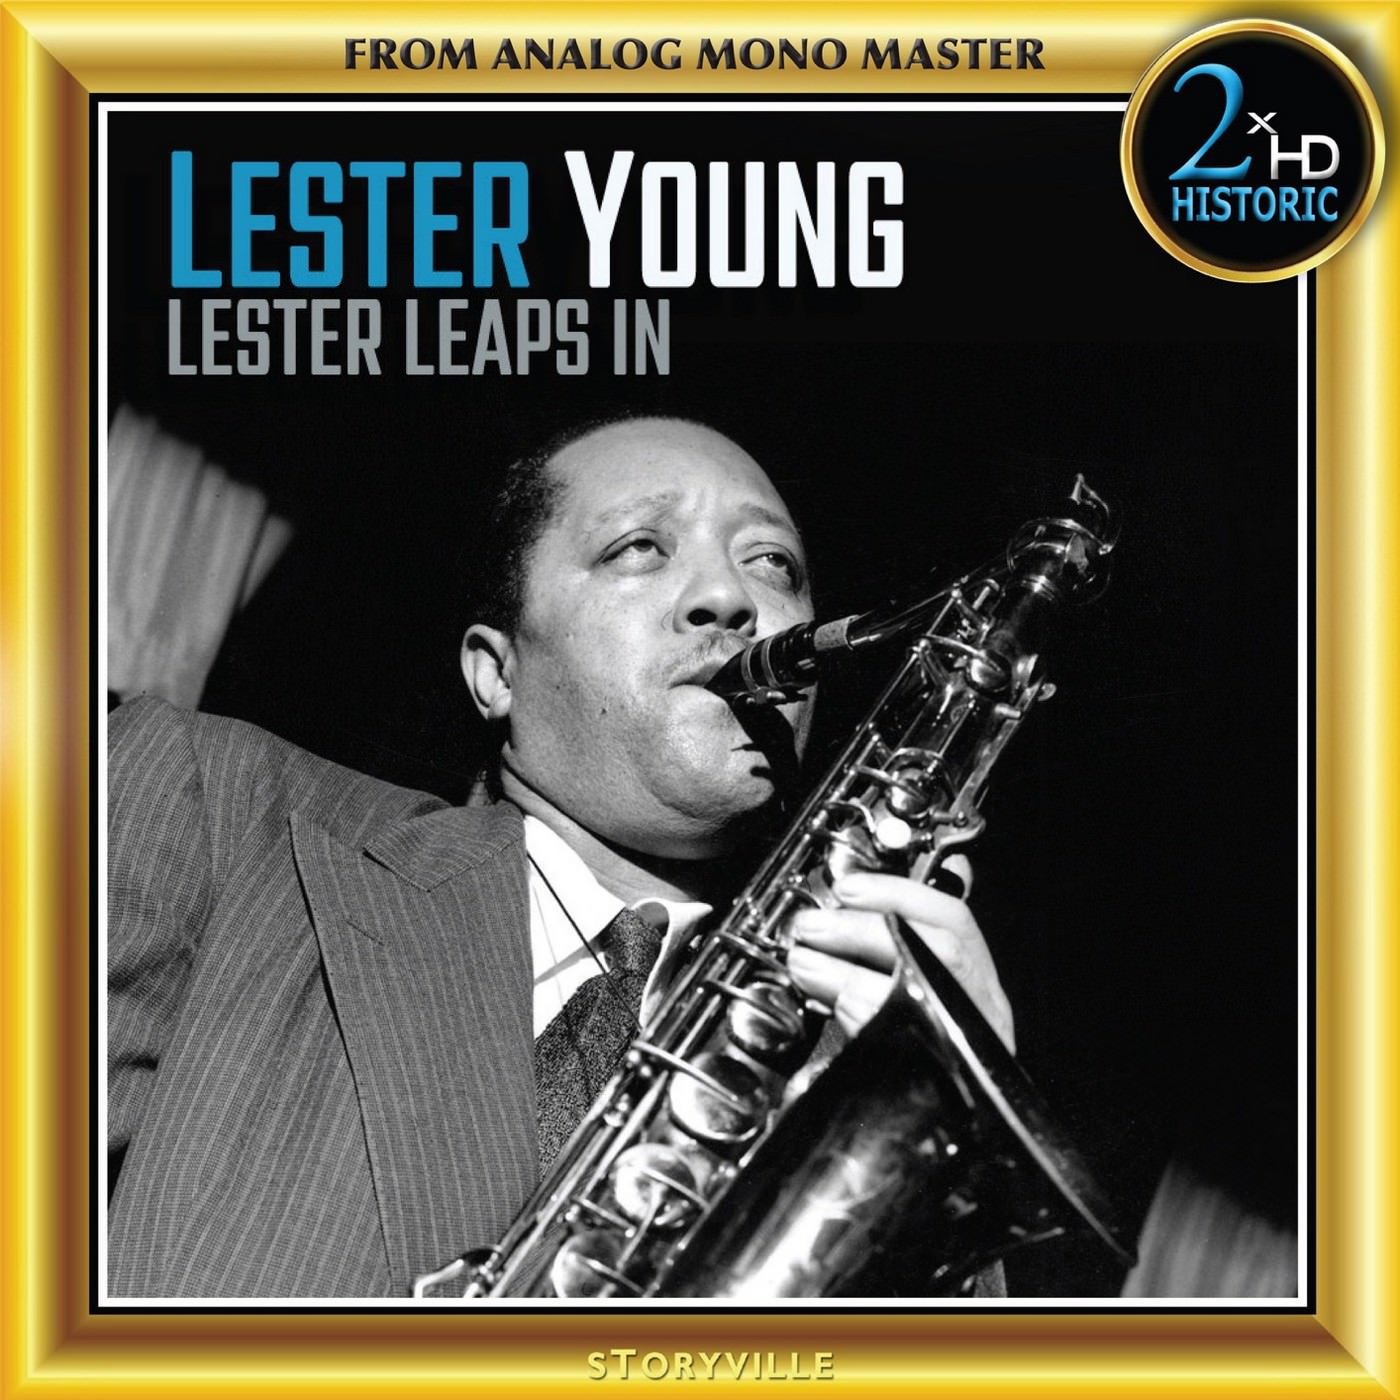 Lester Young – Lester Leaps In (Remastered) (2018) [FLAC 24bit/192kHz]